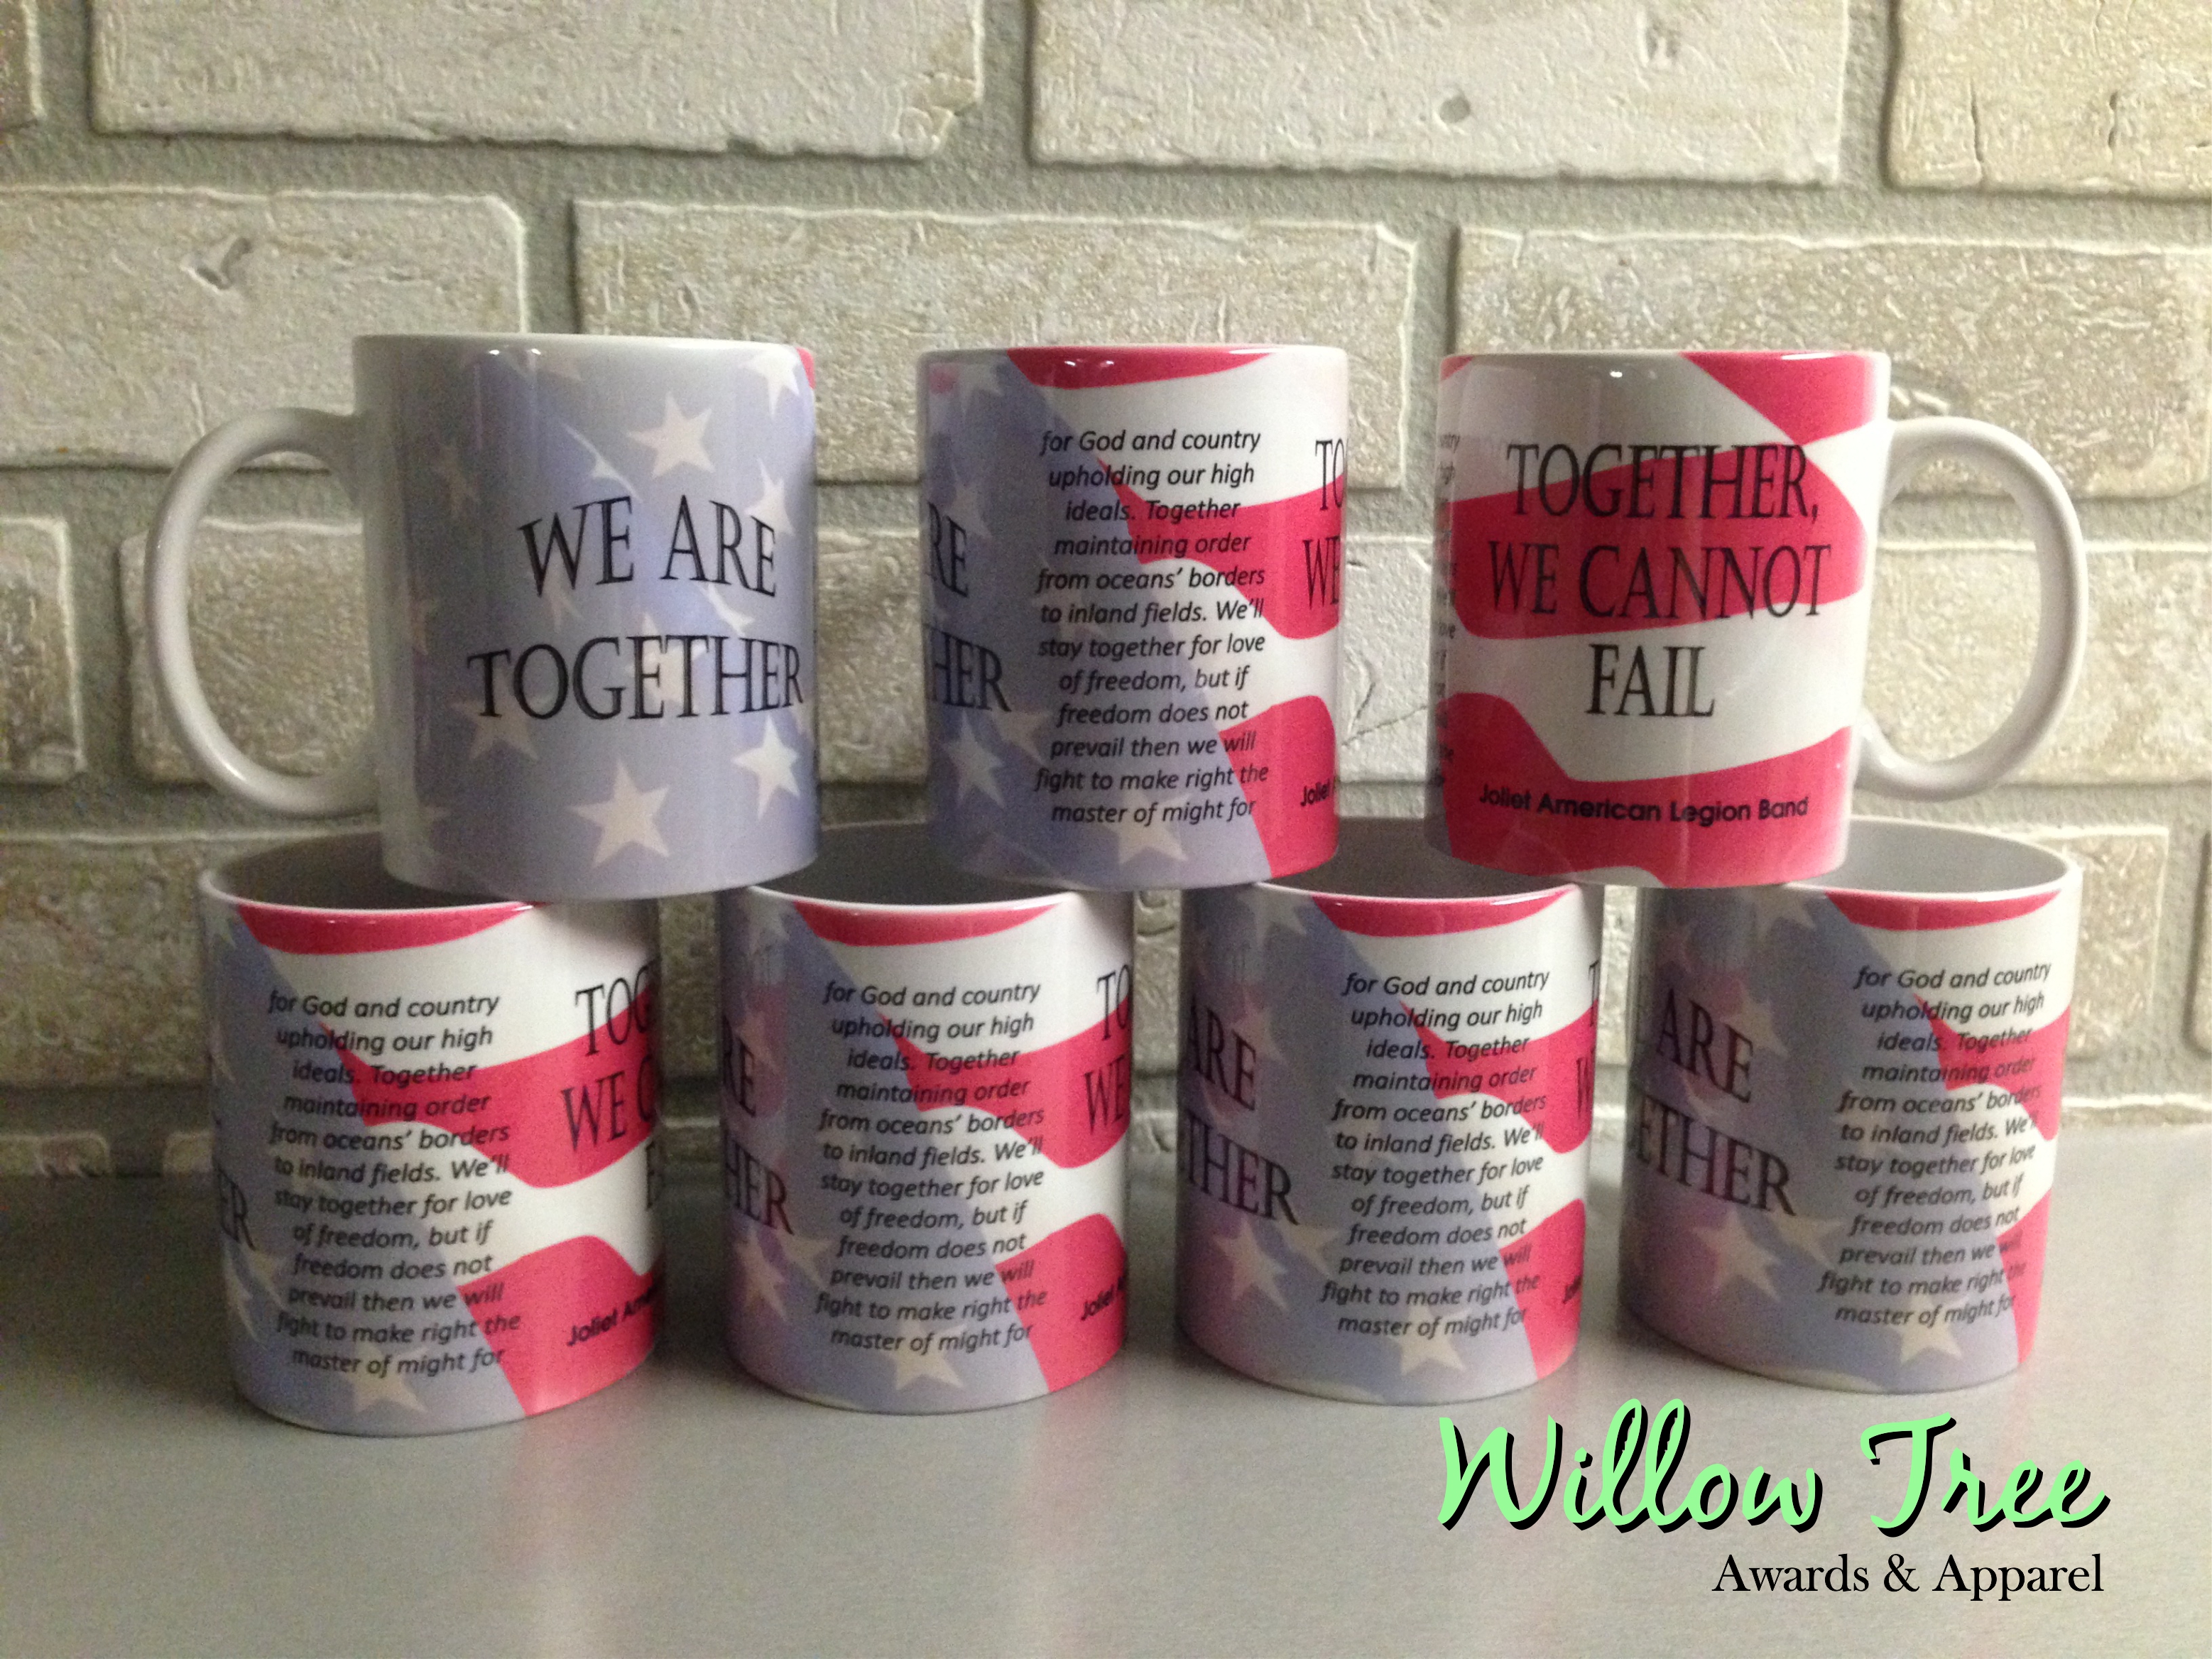 Fundraiser mugs with the preamble of the American Legion constitution in song lyrics.